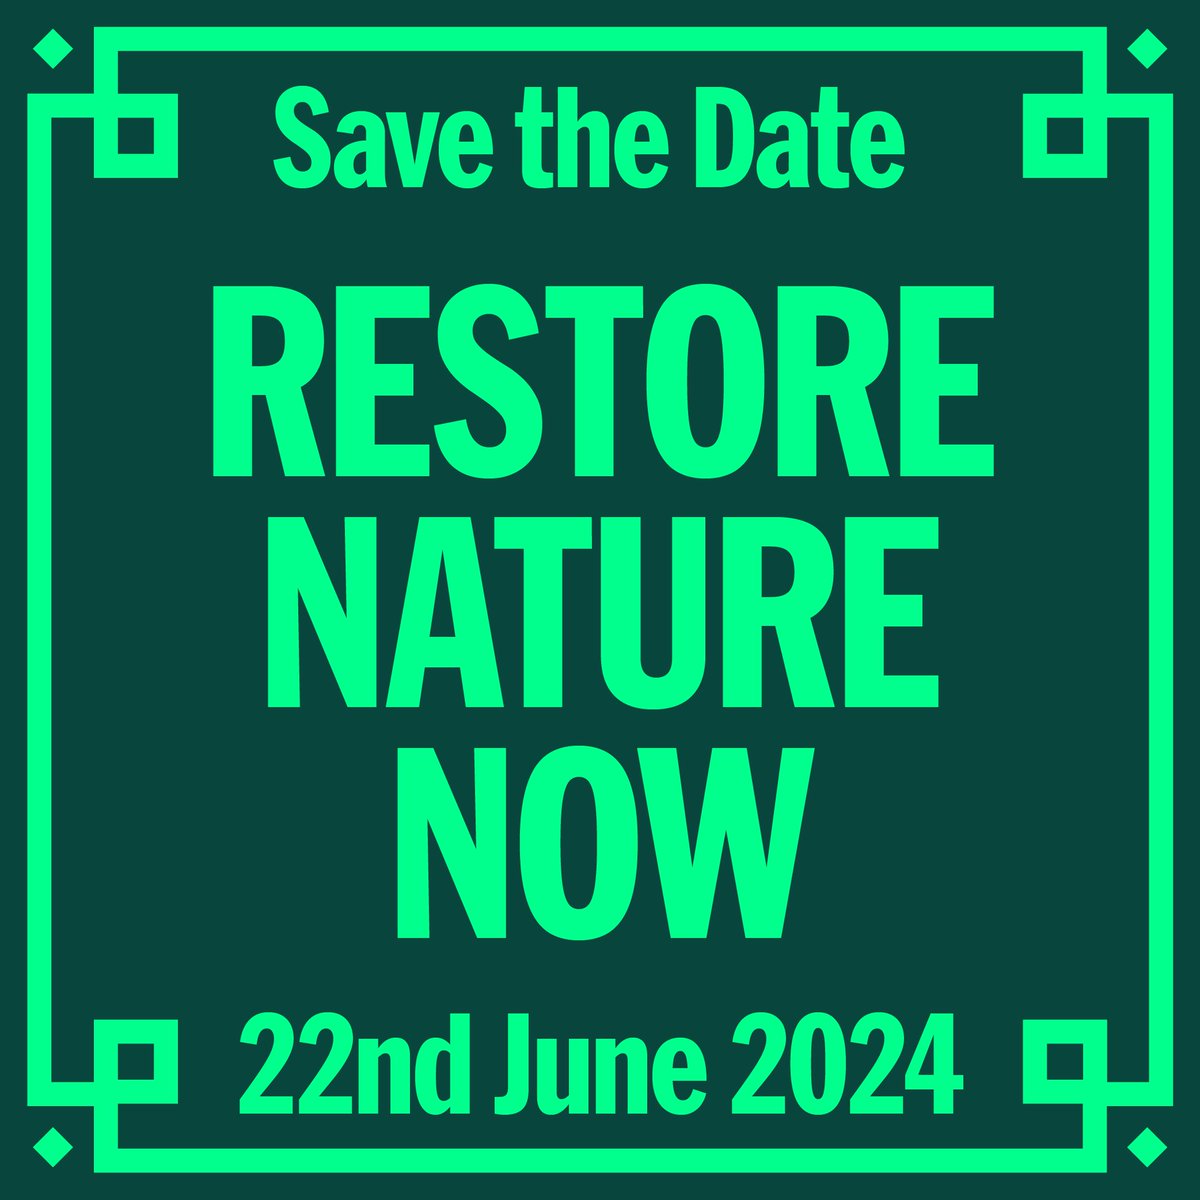 I'll be there .@ChrisGPackham ! But, with climate scientists now thinking we're going to pass 2.5C degrees of global boiling, & ocean temperatures breaking all records, we need to make them 'scared of us!' (as @TheeFaction advise!) @AC_Resist @LeftUnityParty @GreenLeftUK @XRSL4